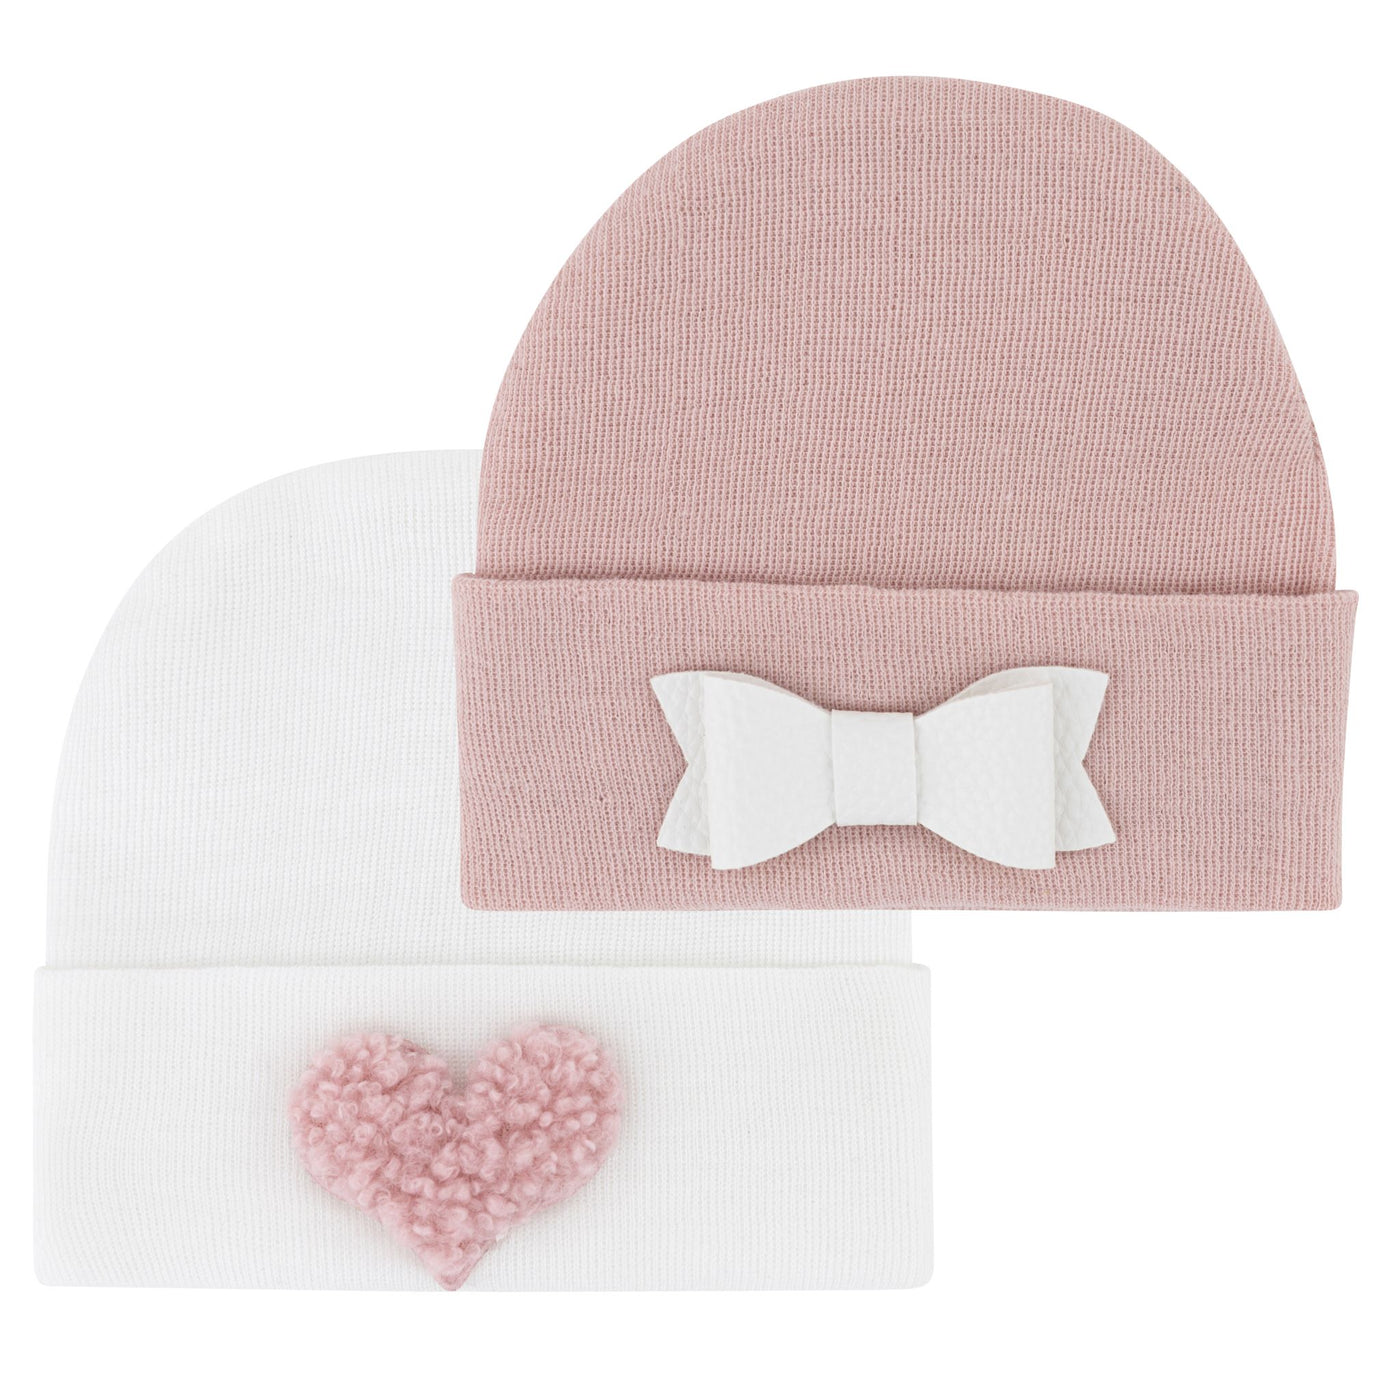 Ely's & Co. Hospital Hats Two Pack Pink/White